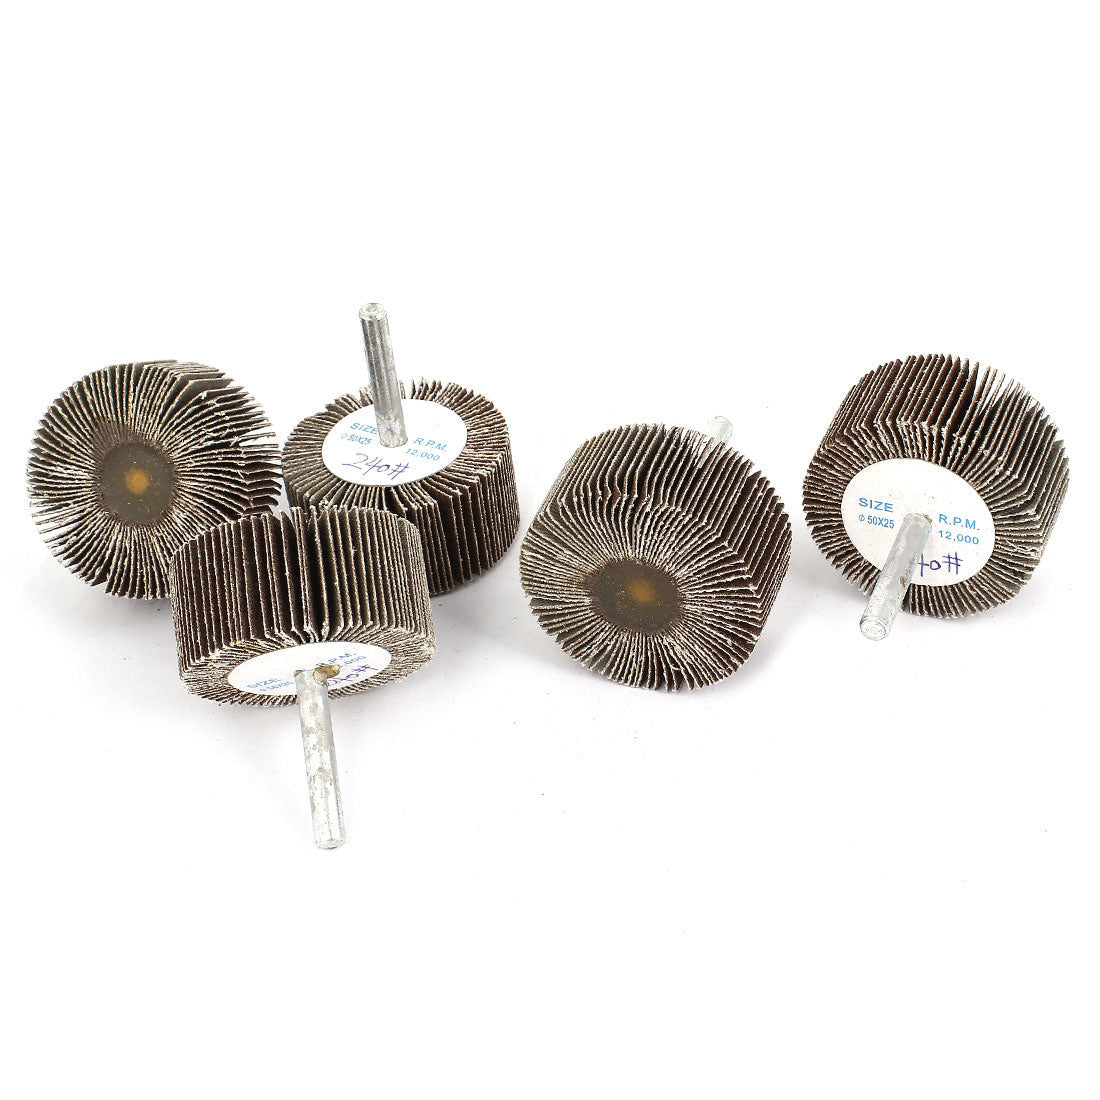 uxcell Uxcell 5 Pieces 240 Grit 50x25x6mm Cylindrical Grinding Polishing Flap Wheel Discs